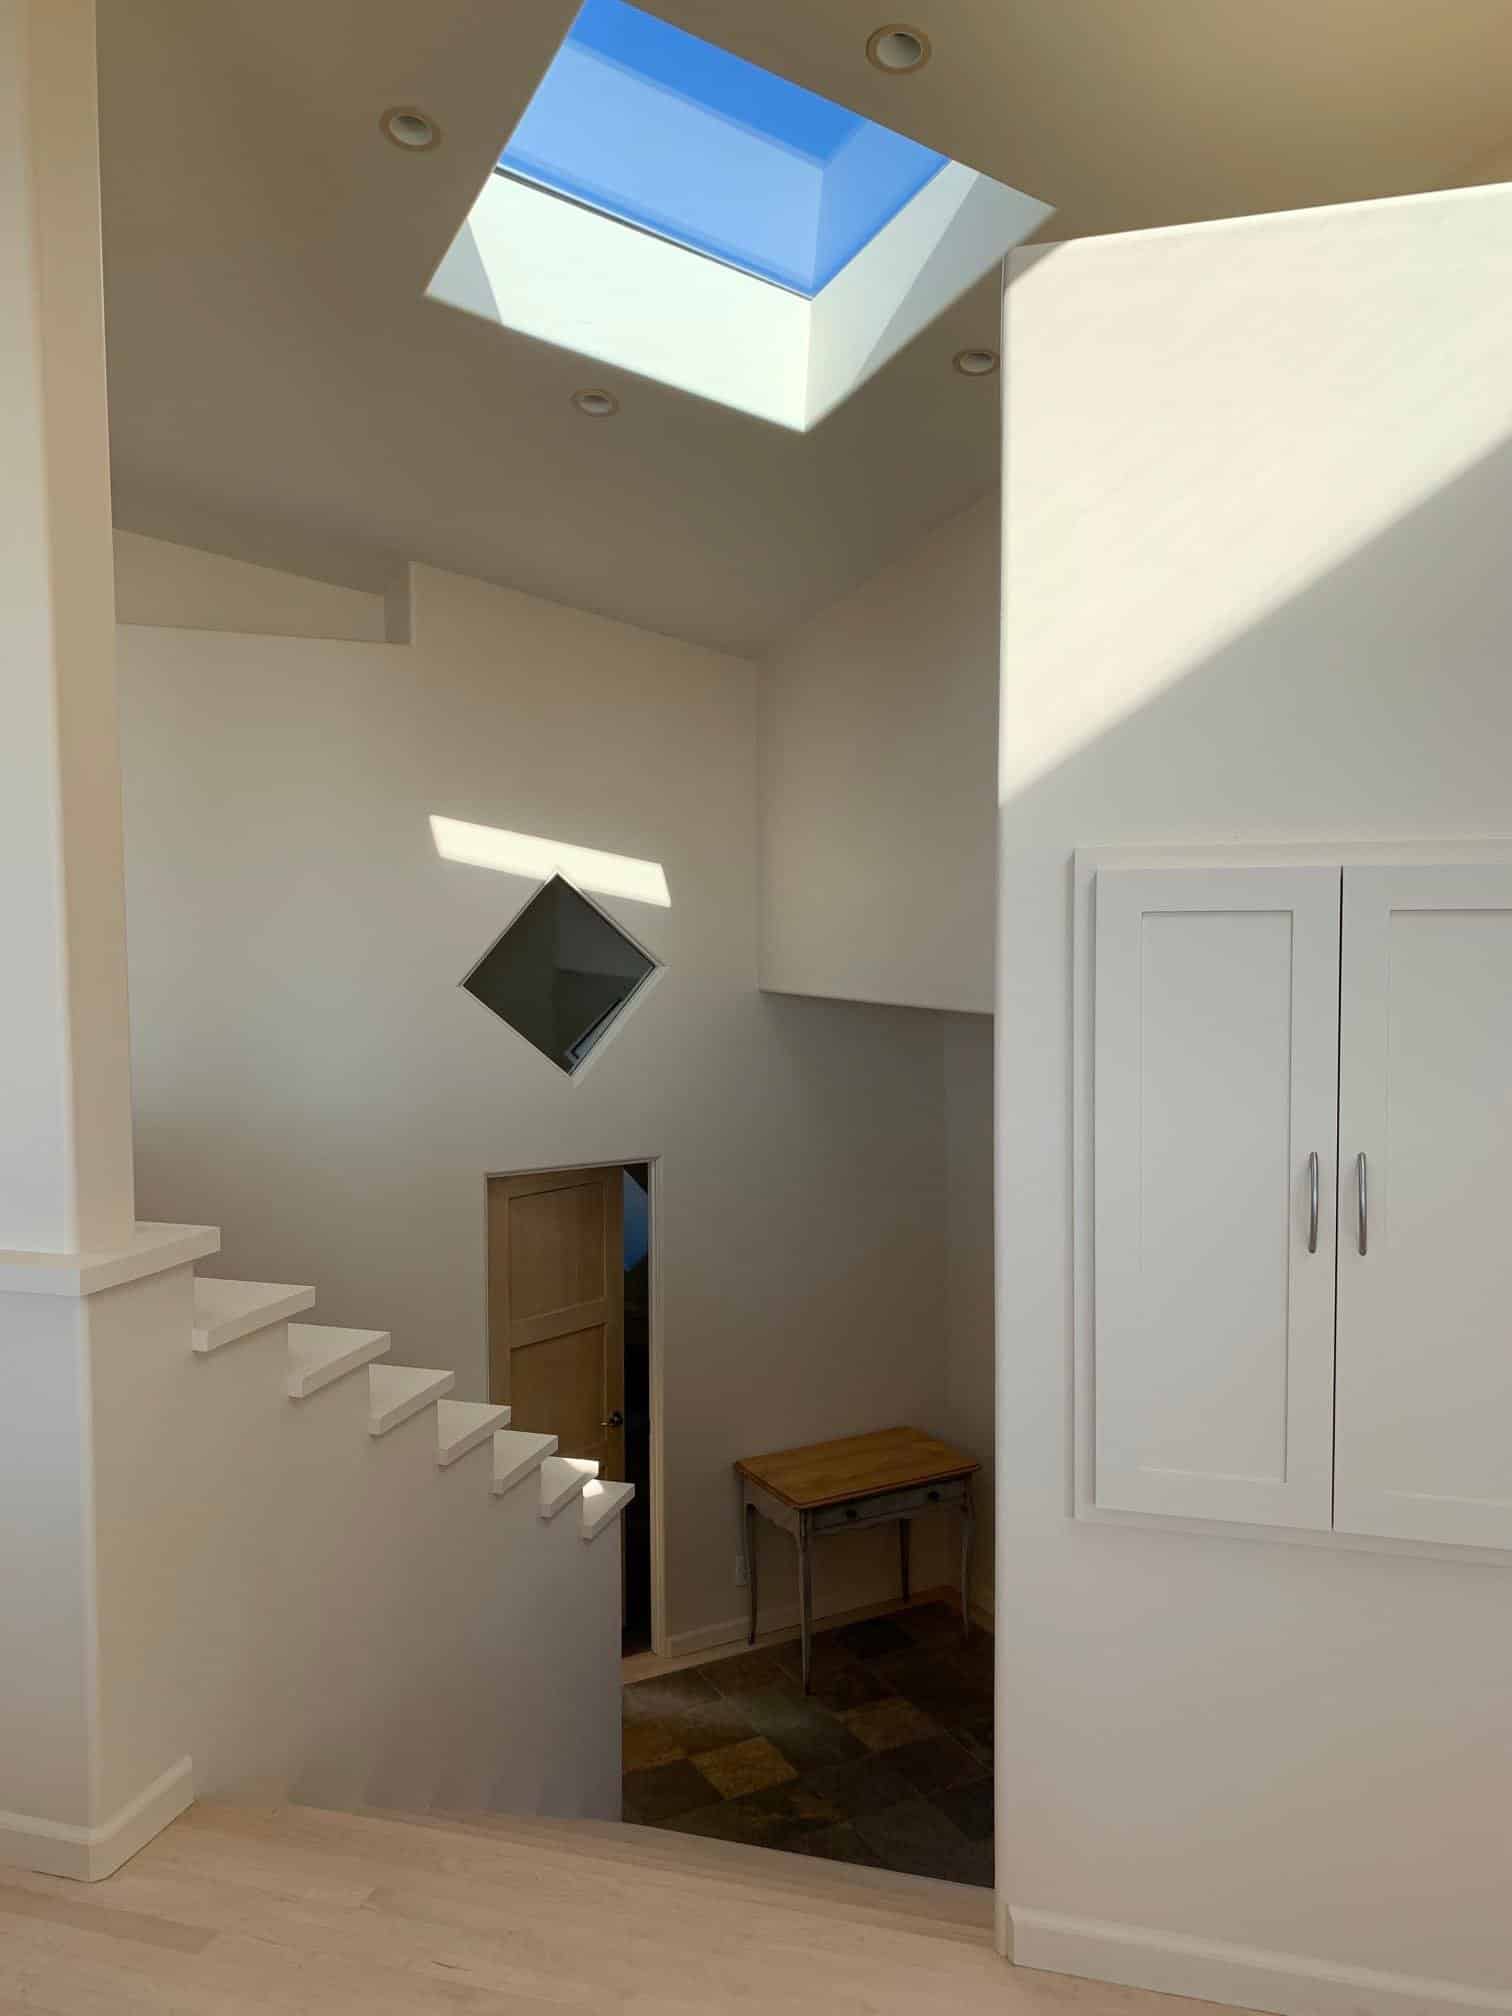 4 Skylight Window FIlm Projects Every Homeowner Should See